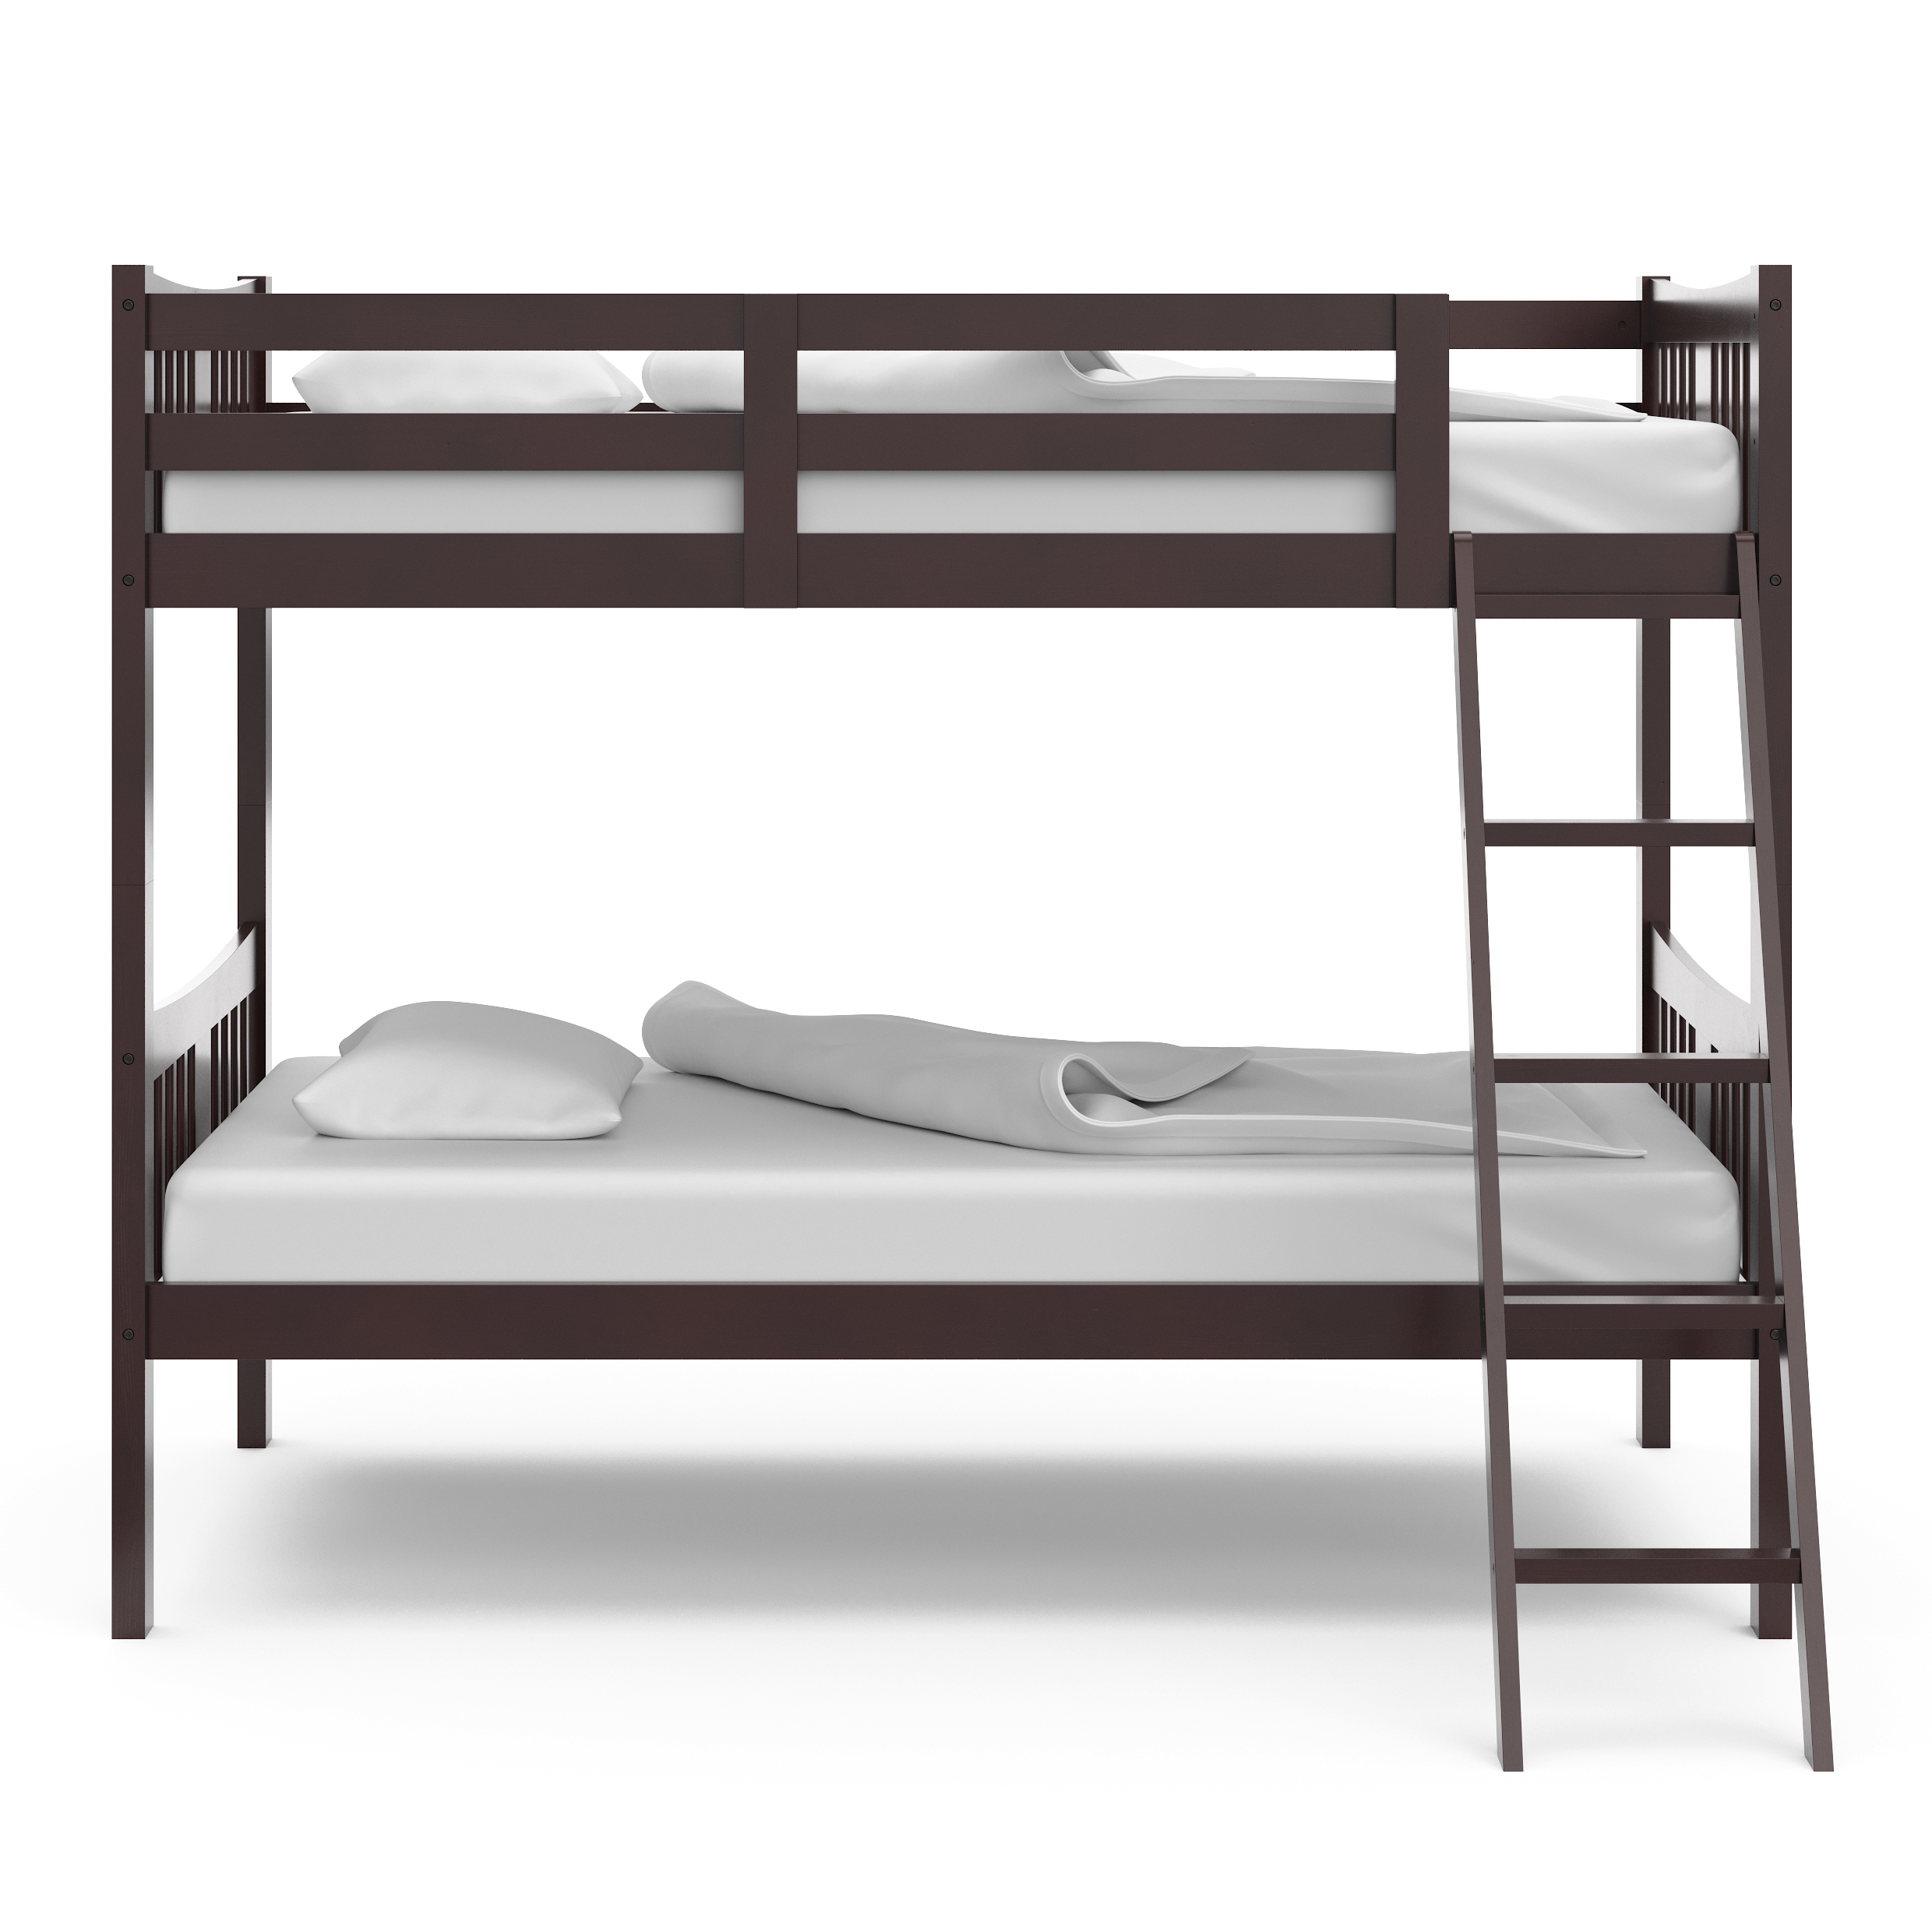 Storkcraft Caribou Twin over Twin Bunk Bed, Espresso - image 5 of 11